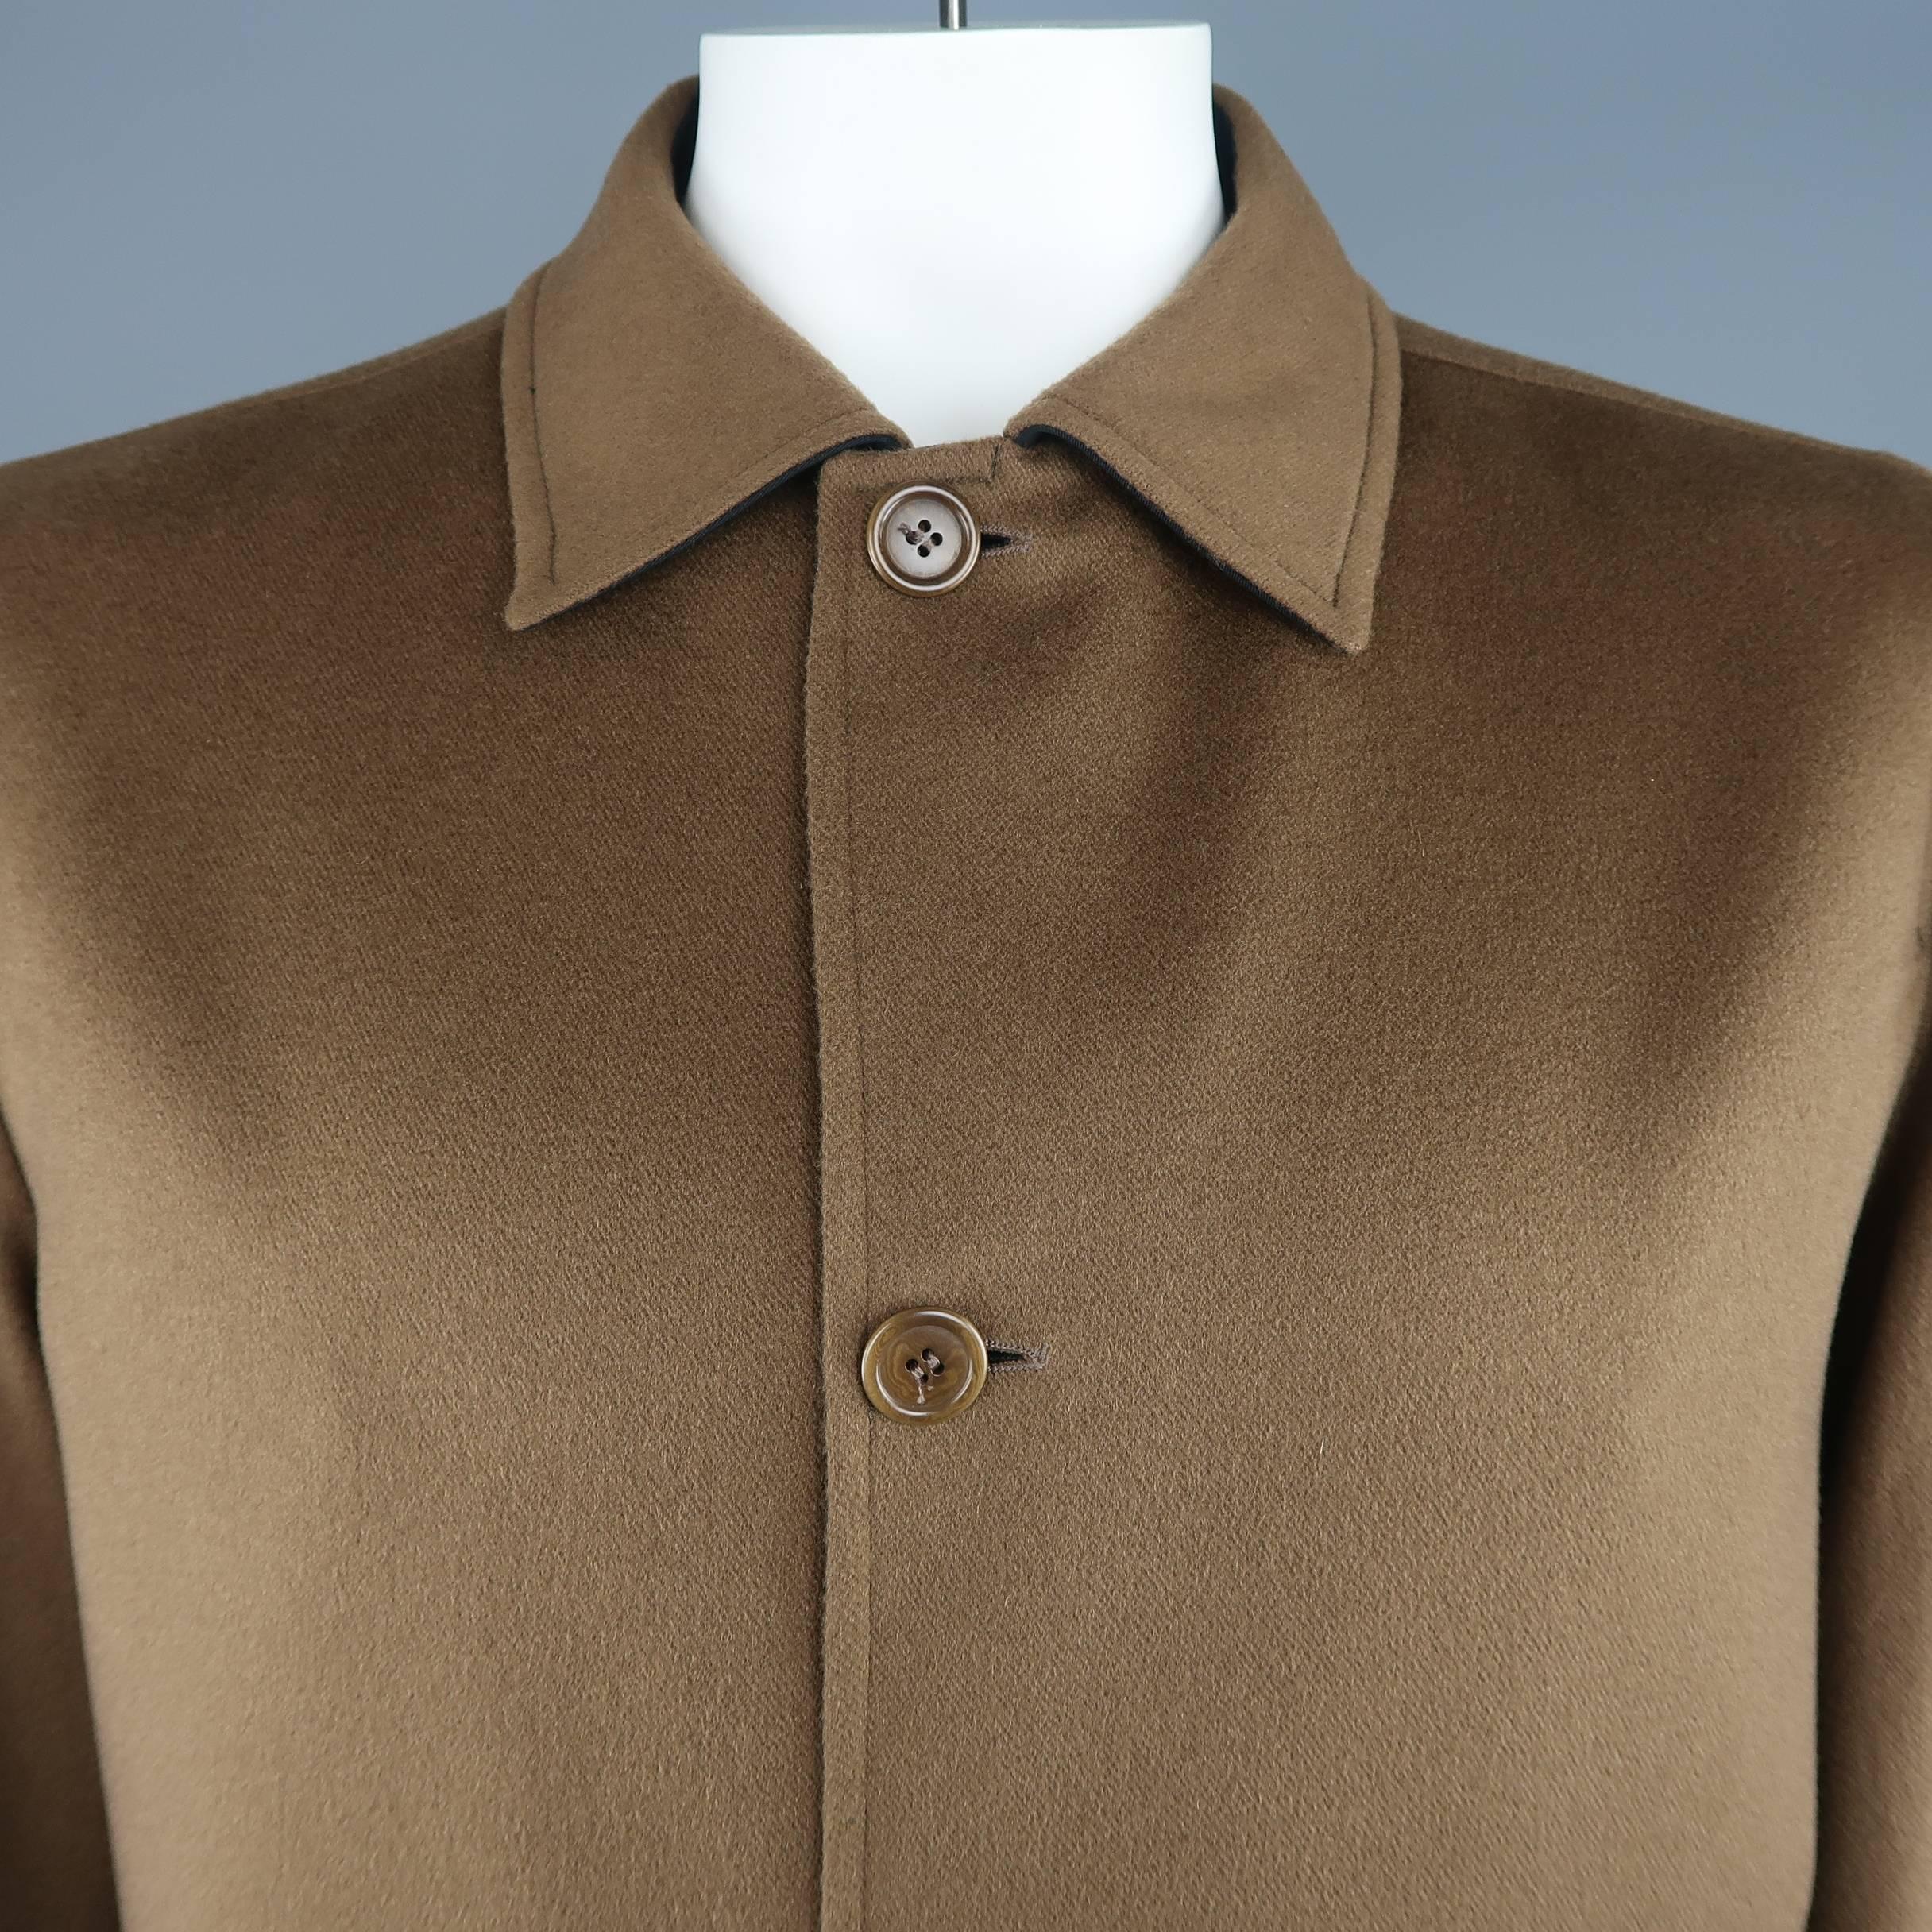 ERMENEGILDO ZEGNA car coat comes in light brown cashmere with a pointed collar, button up front, and patch pockets. Wear reverse in black twill. Made in Italy.
 
Excellent Pre-Owned Condition.
Marked: IT 50
 
Measurements:
 
Shoulder: 19 in.
Chest: